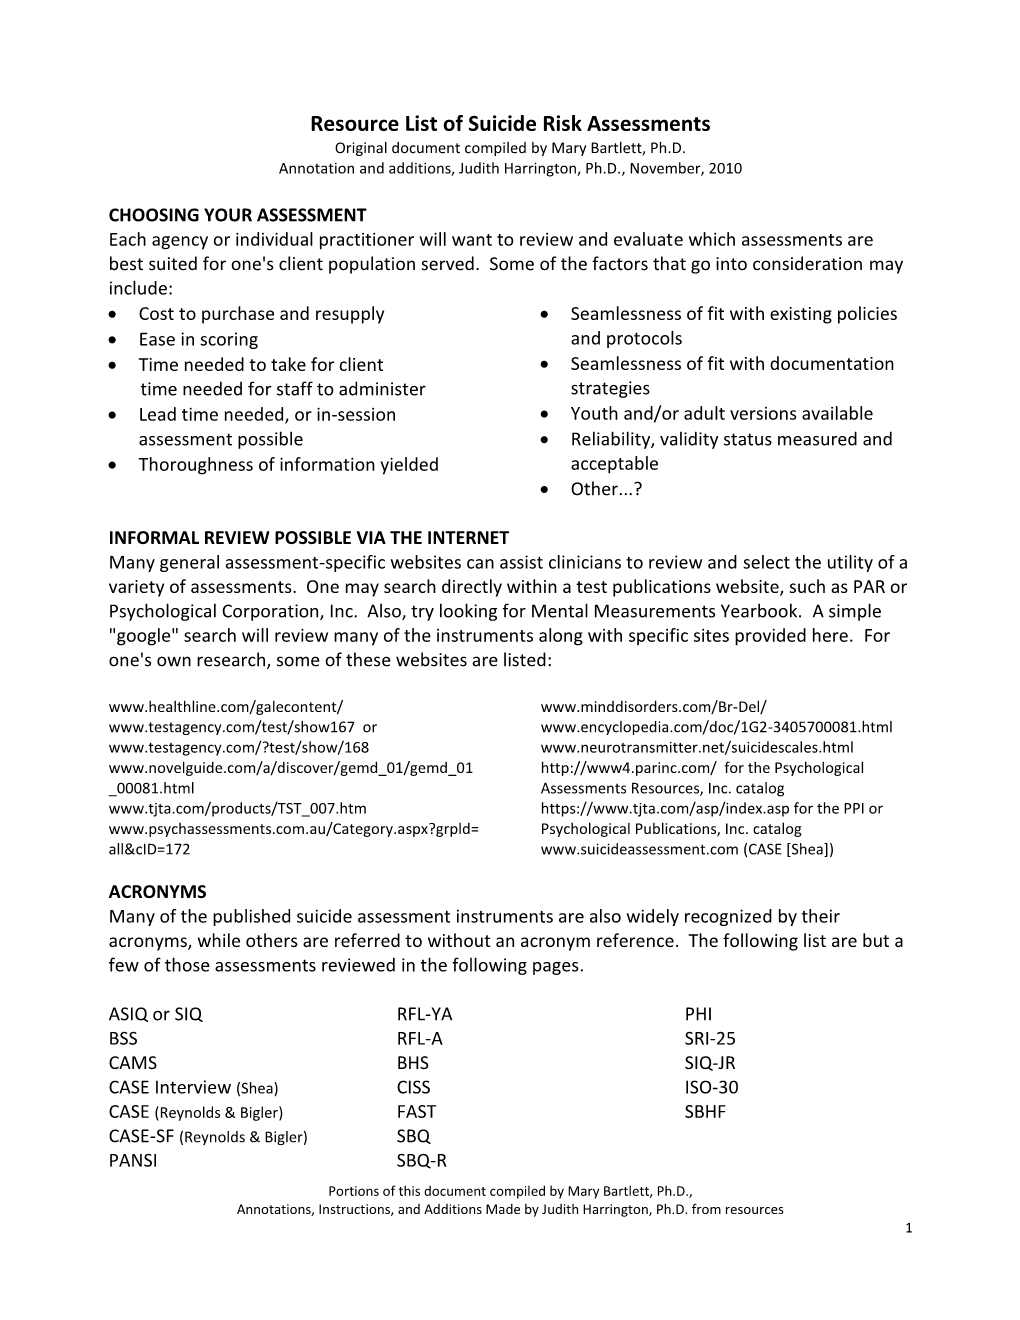 Resource List of Suicide Risk Assessments (PDF)